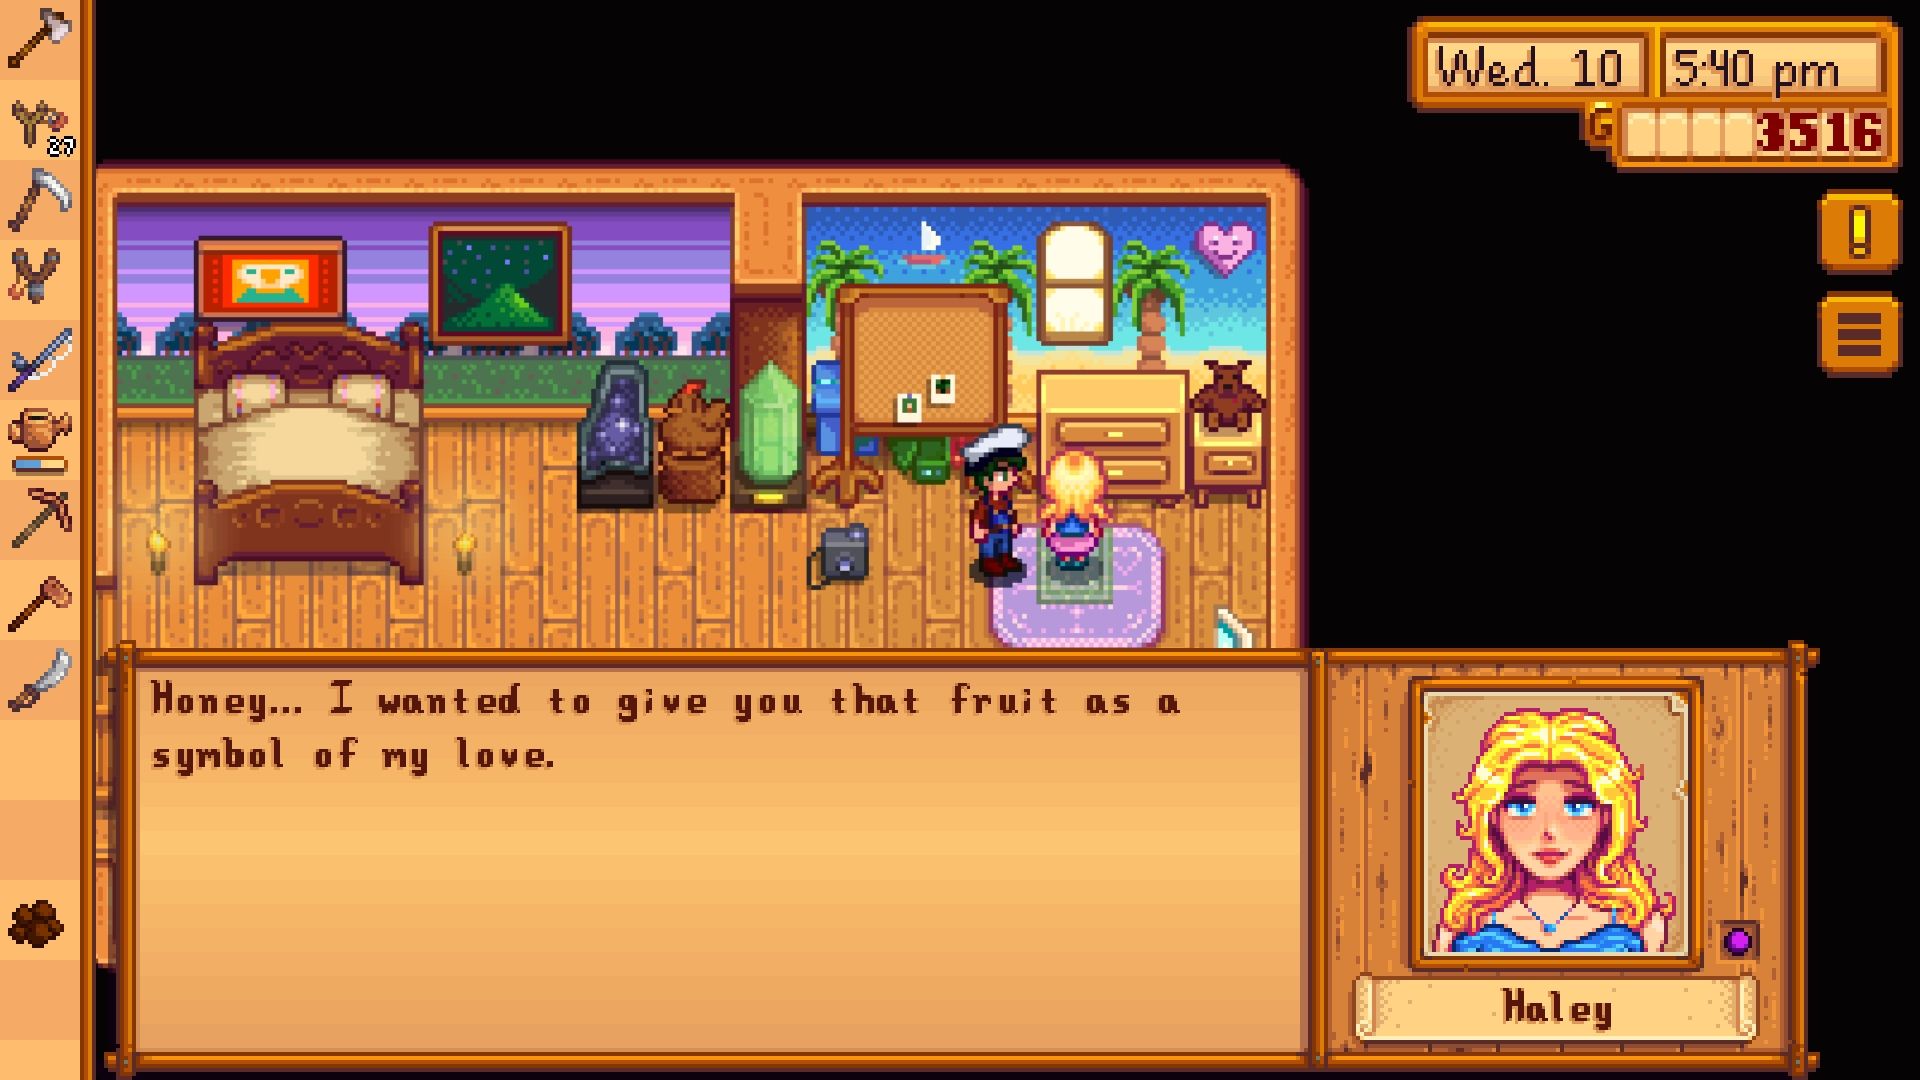 marry haley spouse stardew valley stardrop gift